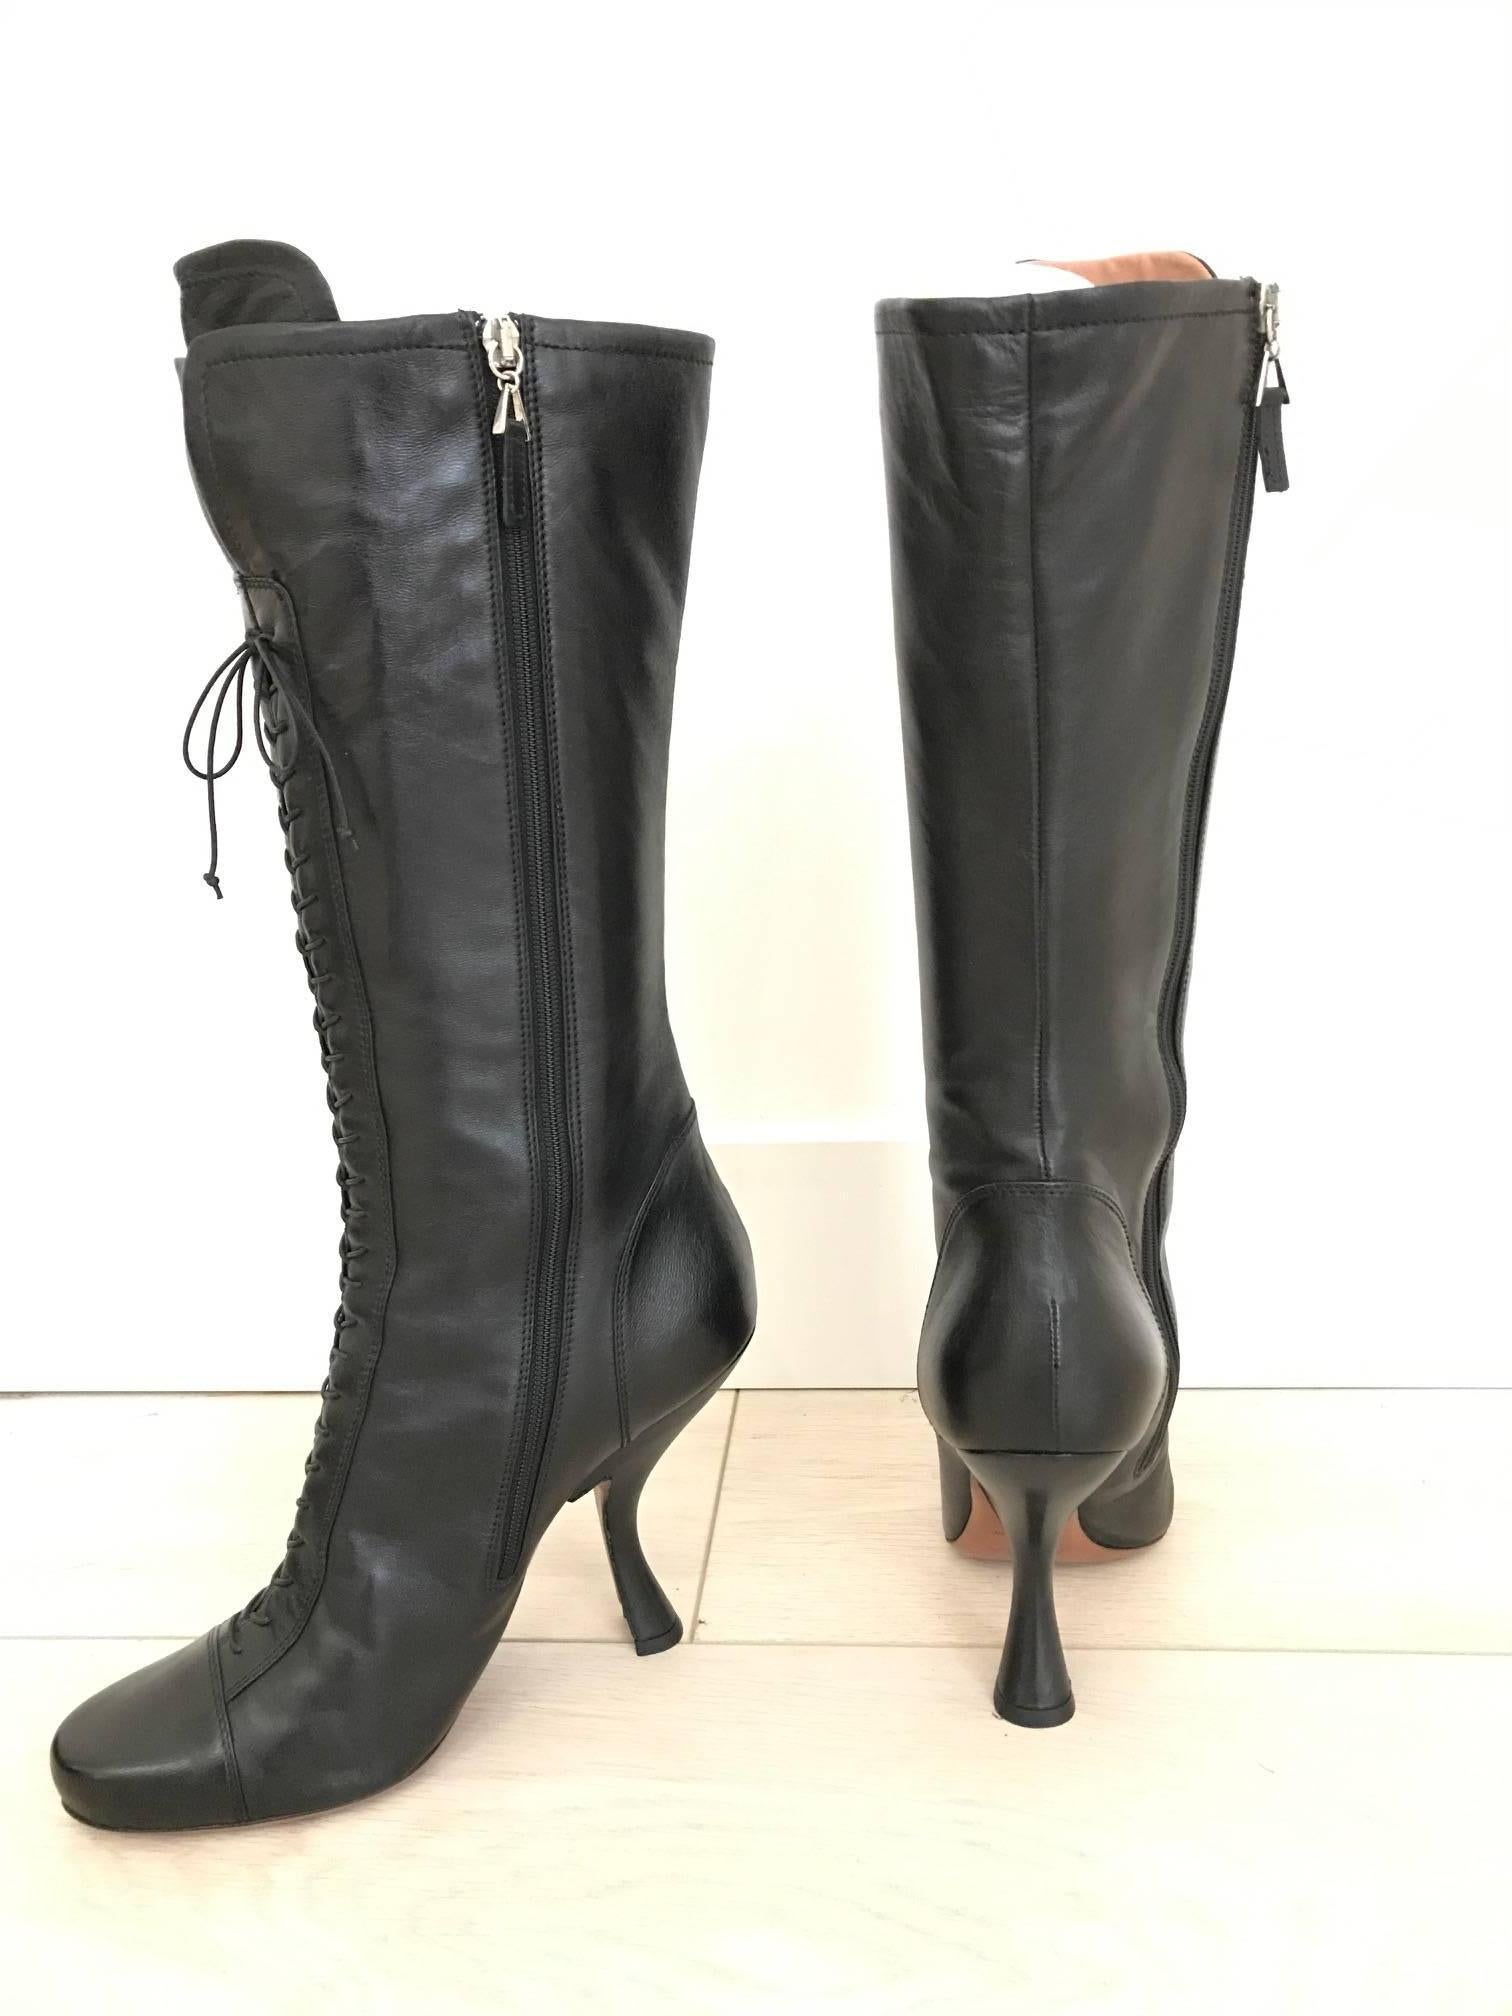 Vintage ALAIA black leather knee boot. Size 39. In great condition
Heel height: 4 inch
Height of the boots 11.5 inch